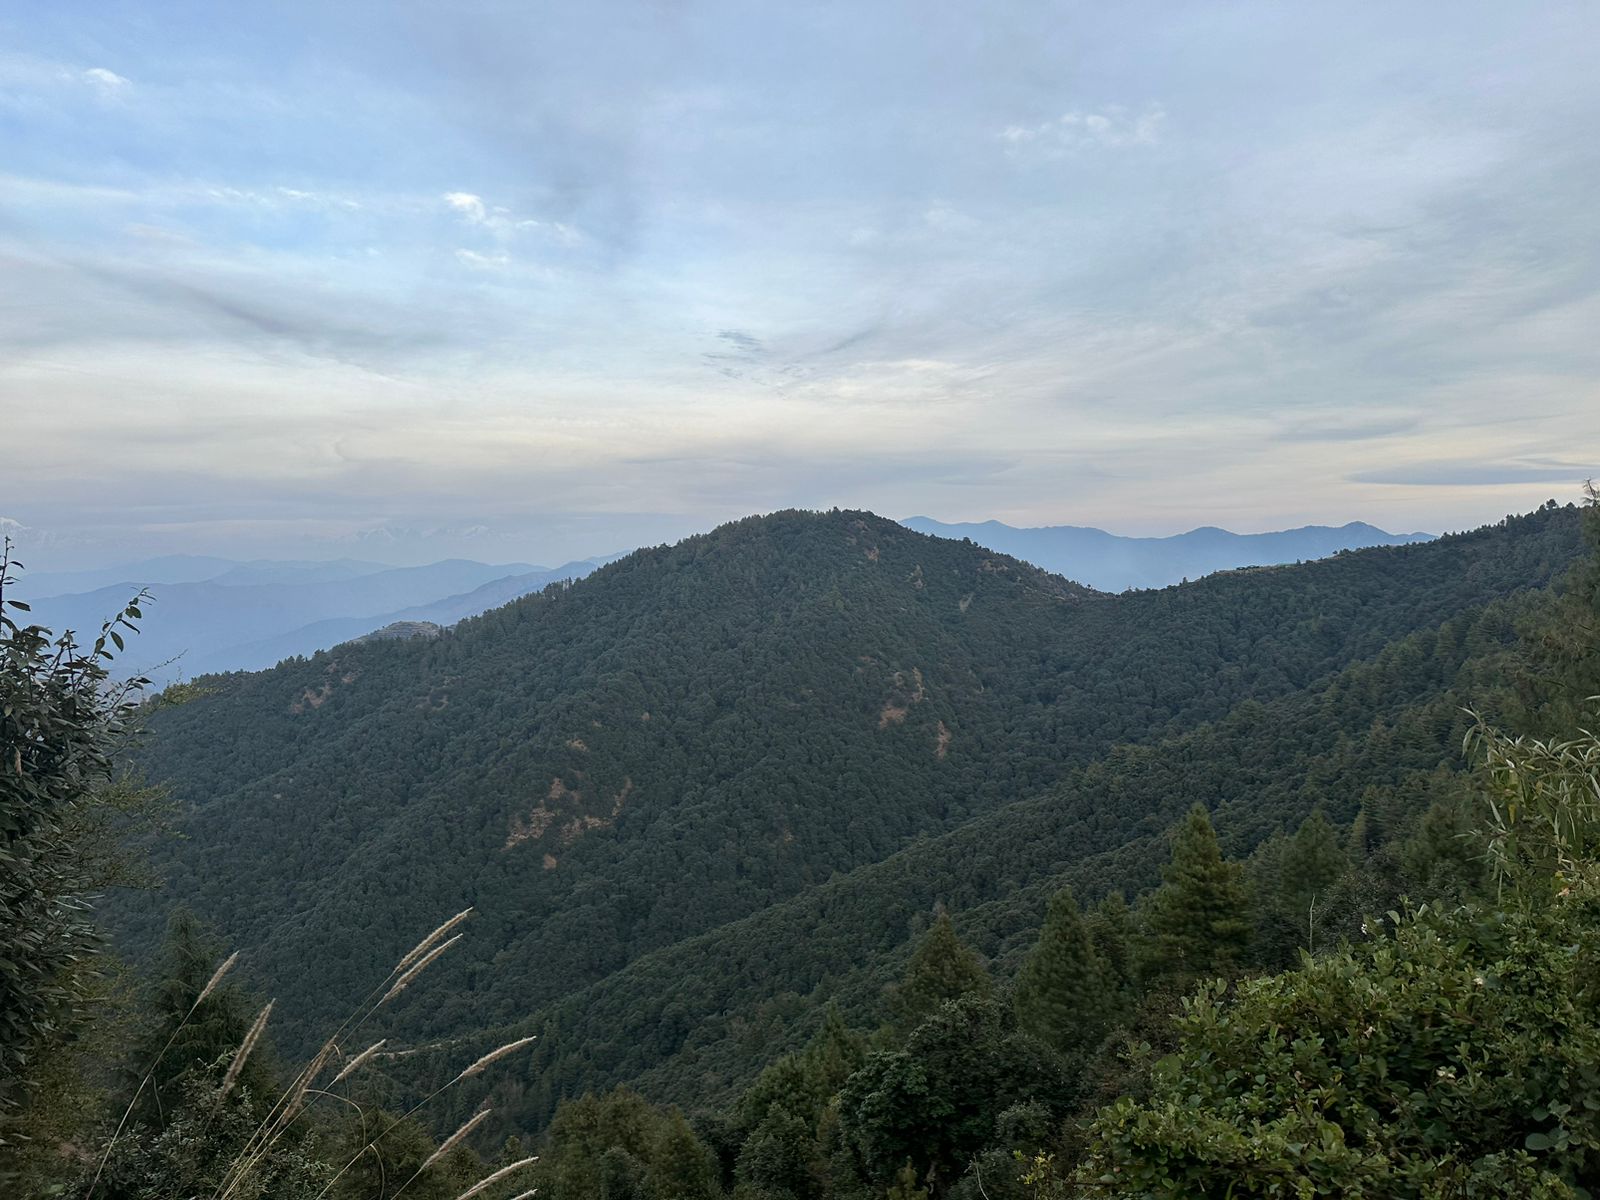 Chakrata Travel Guide: A Hidden Paradise in Uttarakhand - Things to do in Chakrata scenic beauty offbeat travel destination hill station